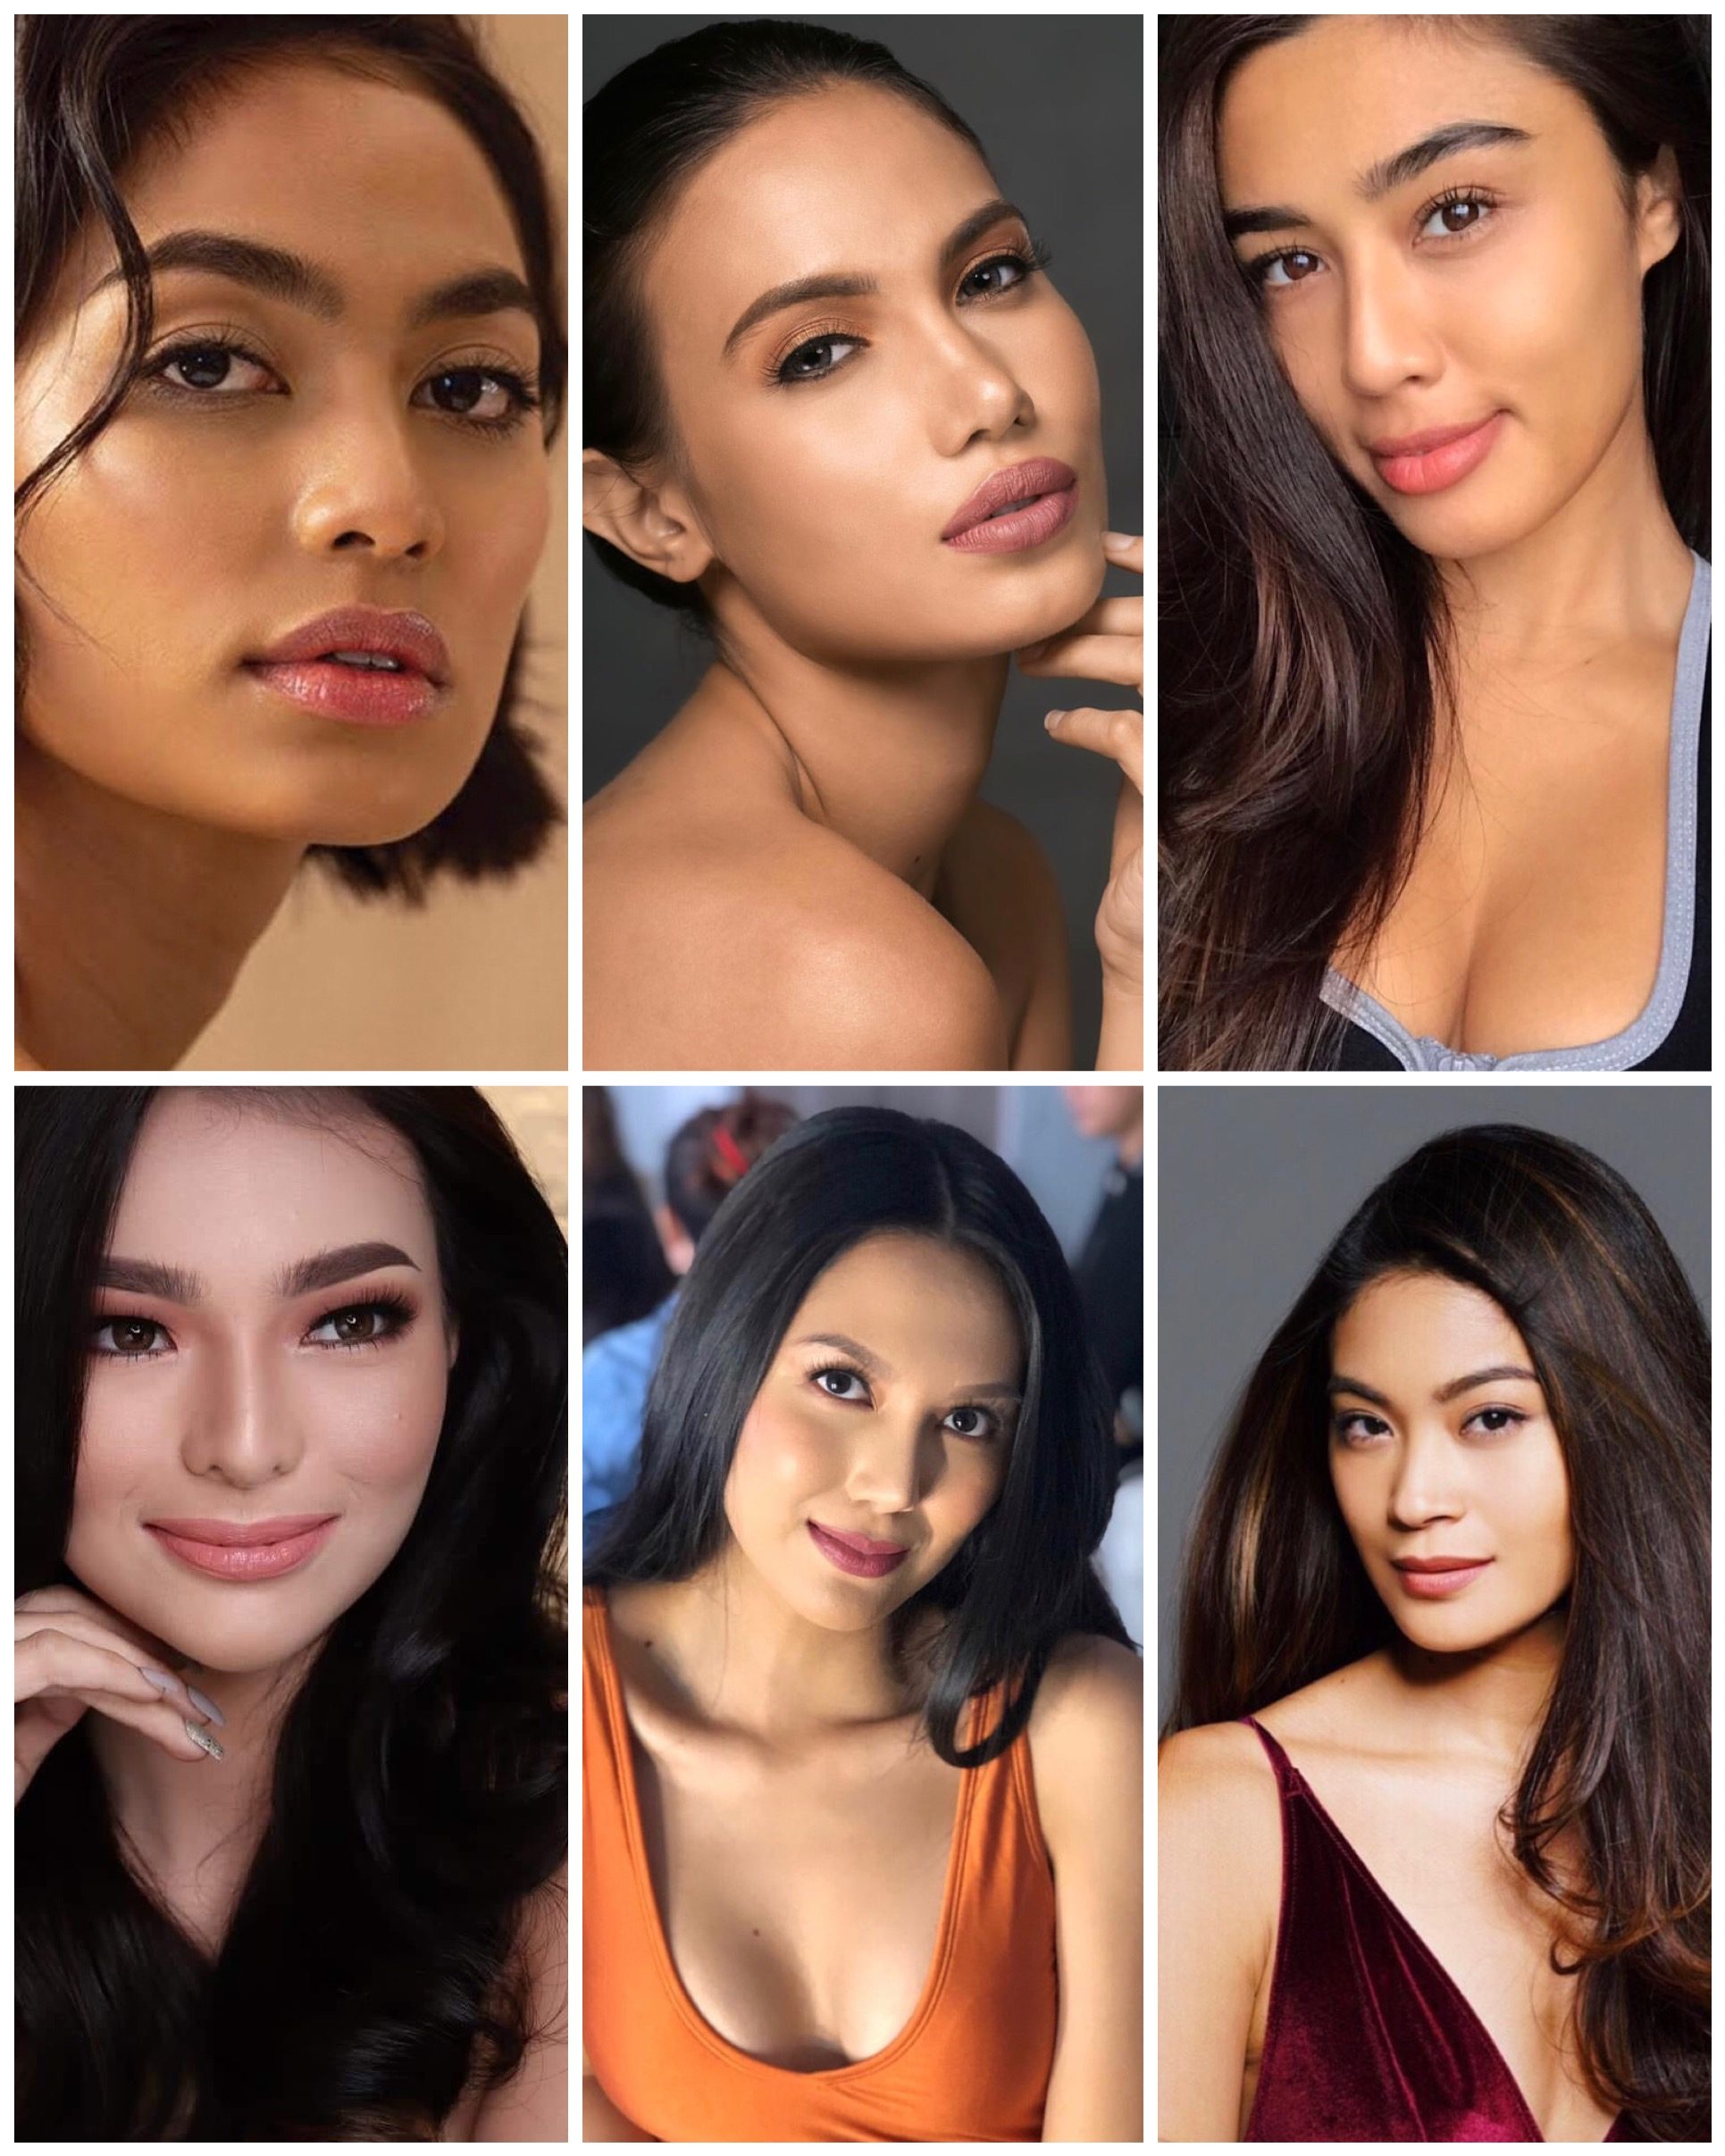 ONE MORE TRY? Will a second chance be lucky for these ladies? Screenshots from Alaiza, Sirene, Sandra, Emma, Wynonah, and Aya's Instagram page 